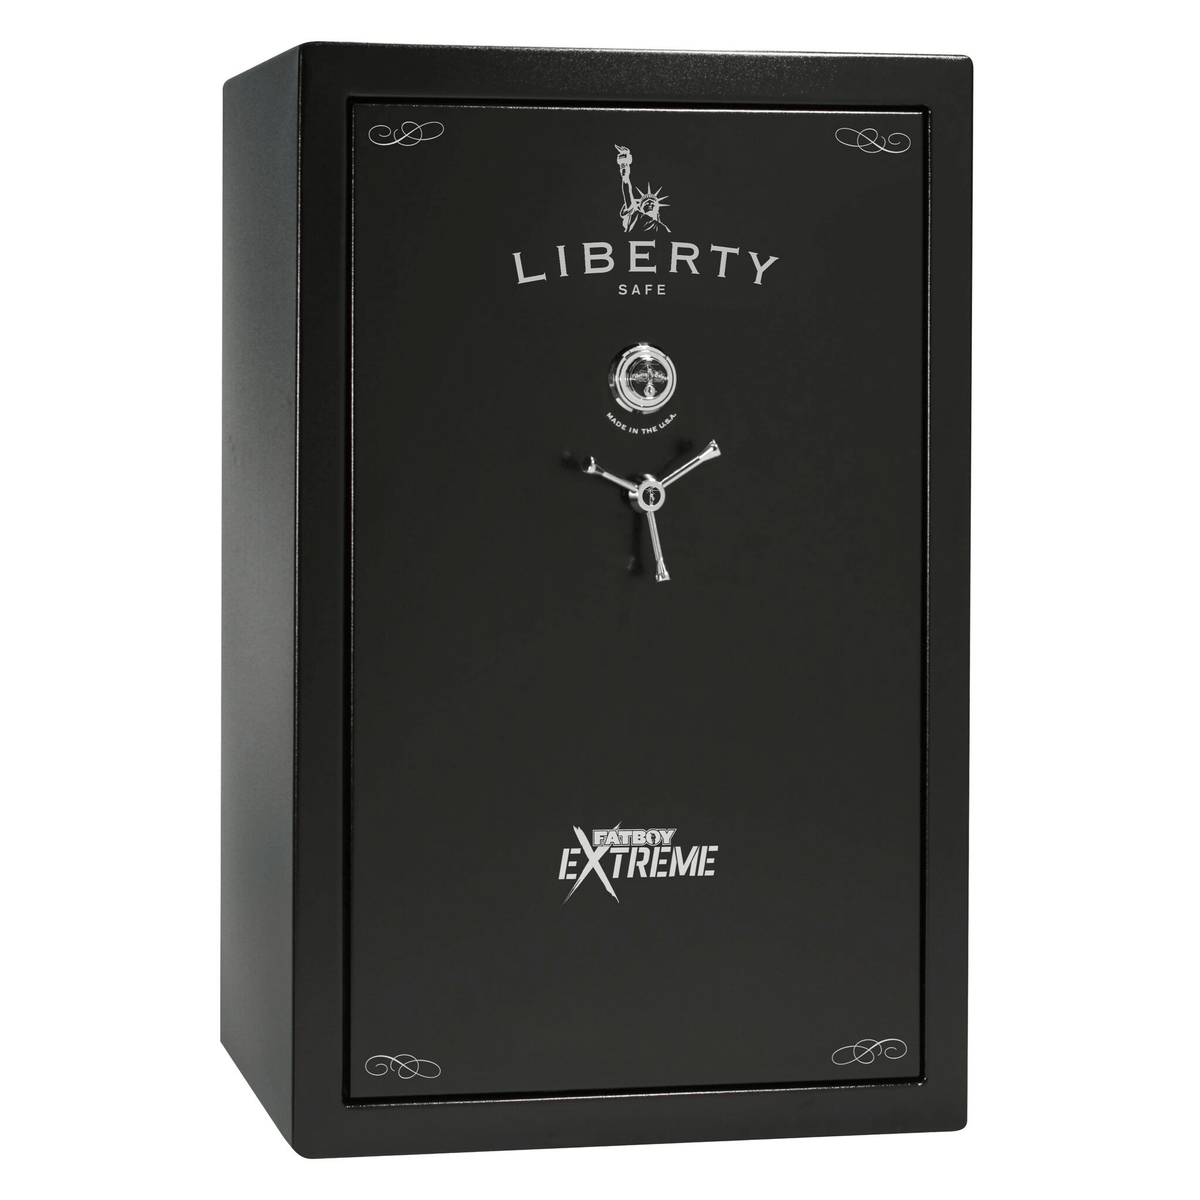 Lincoln Fatboy Extreme 64XT Safe in Textured Black with Chrome Mechanical Lock.